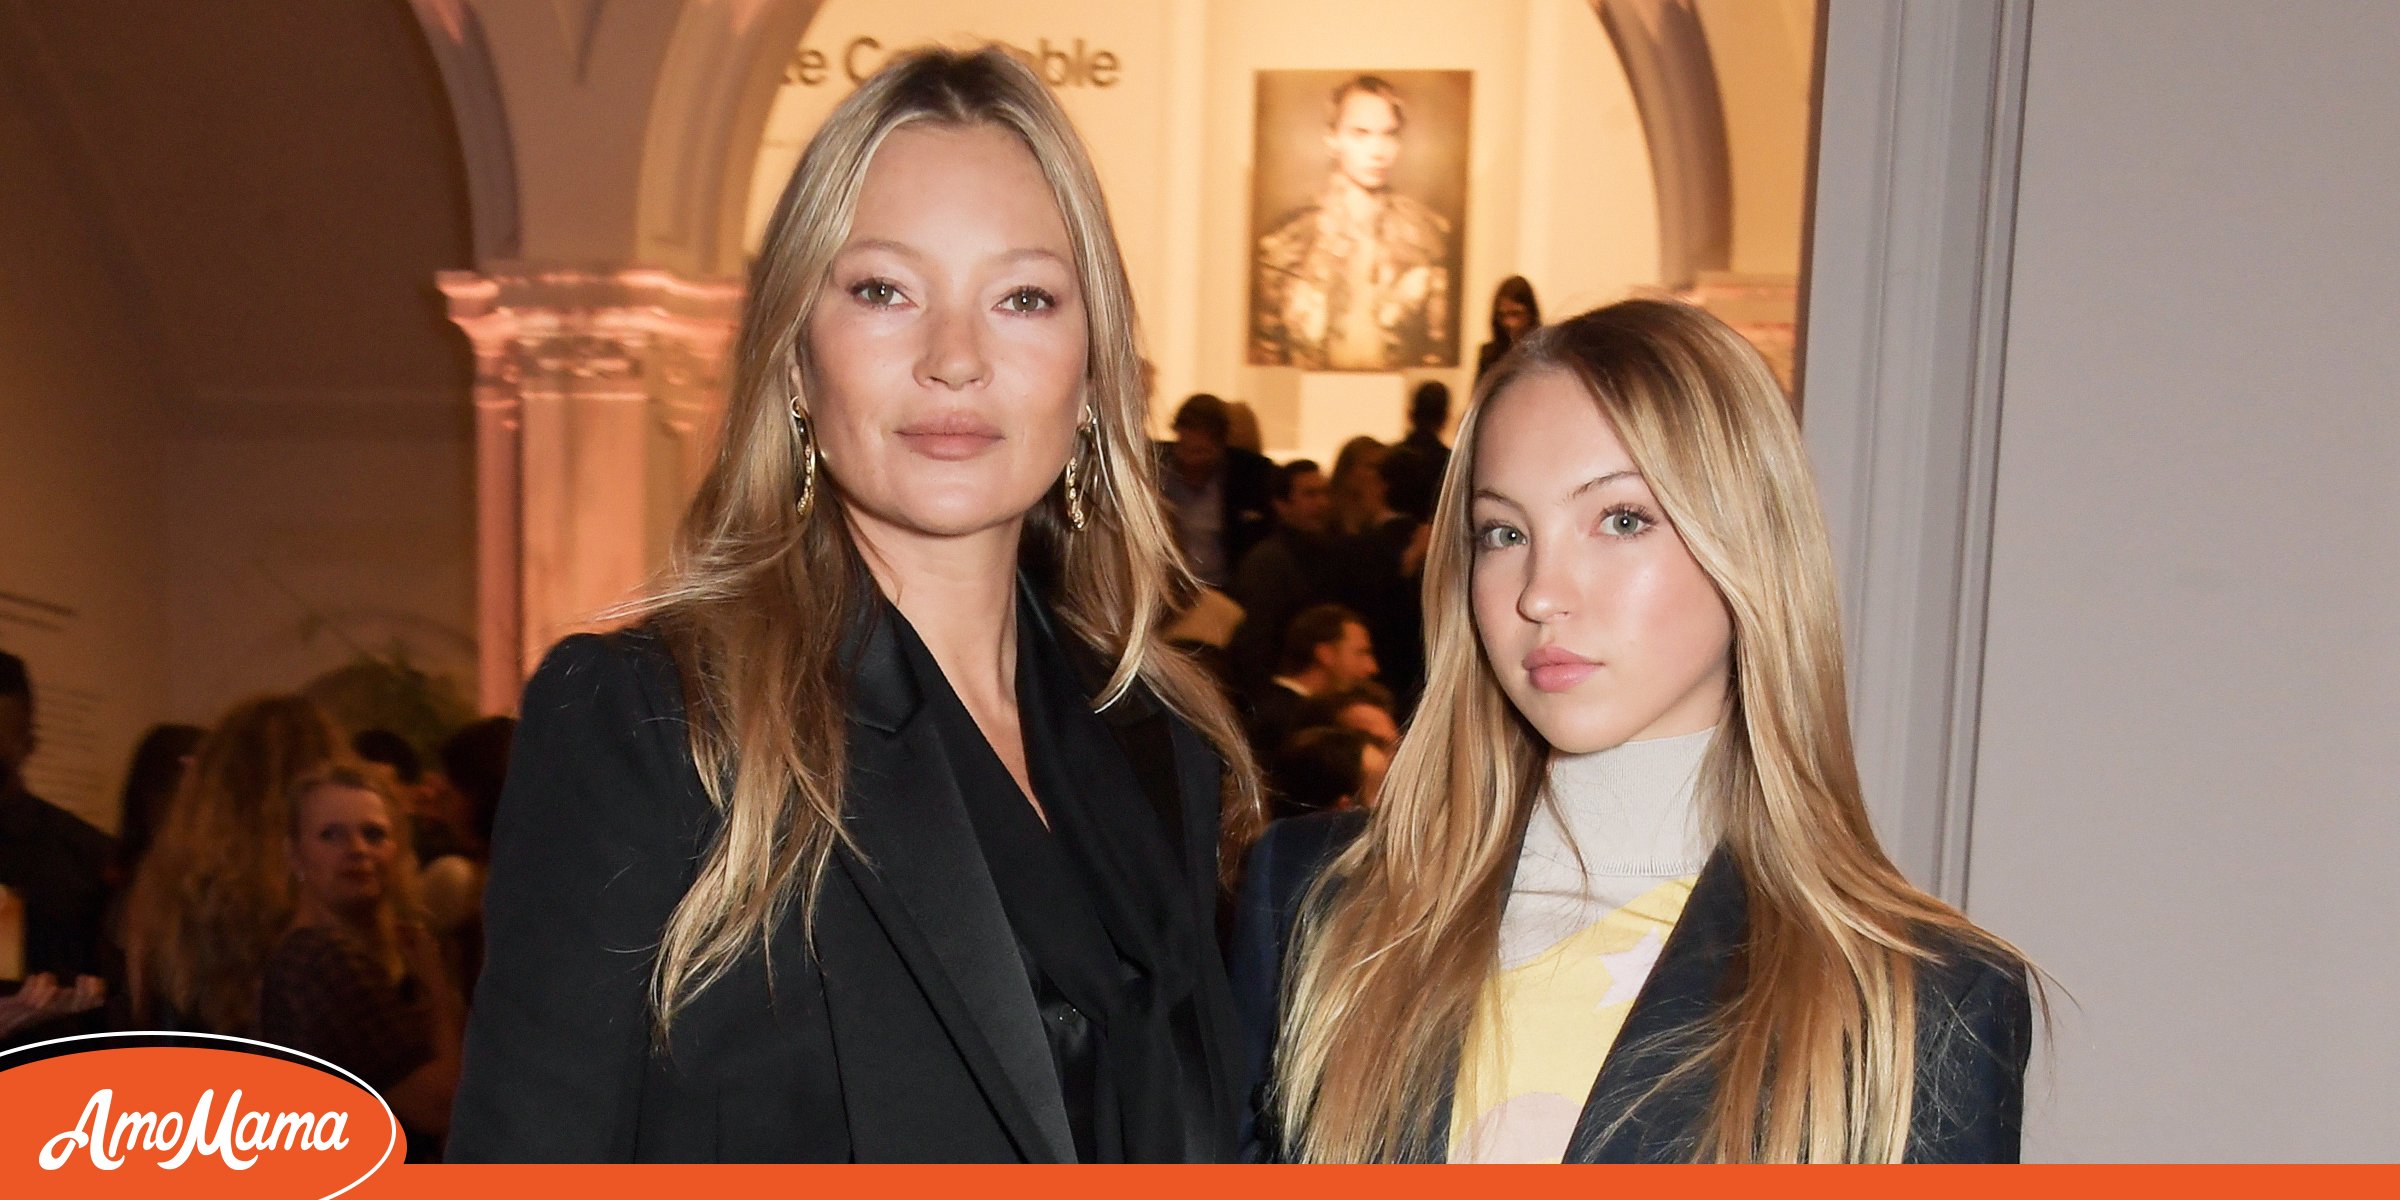 Who Is the Father of Kate Moss' Daughter?